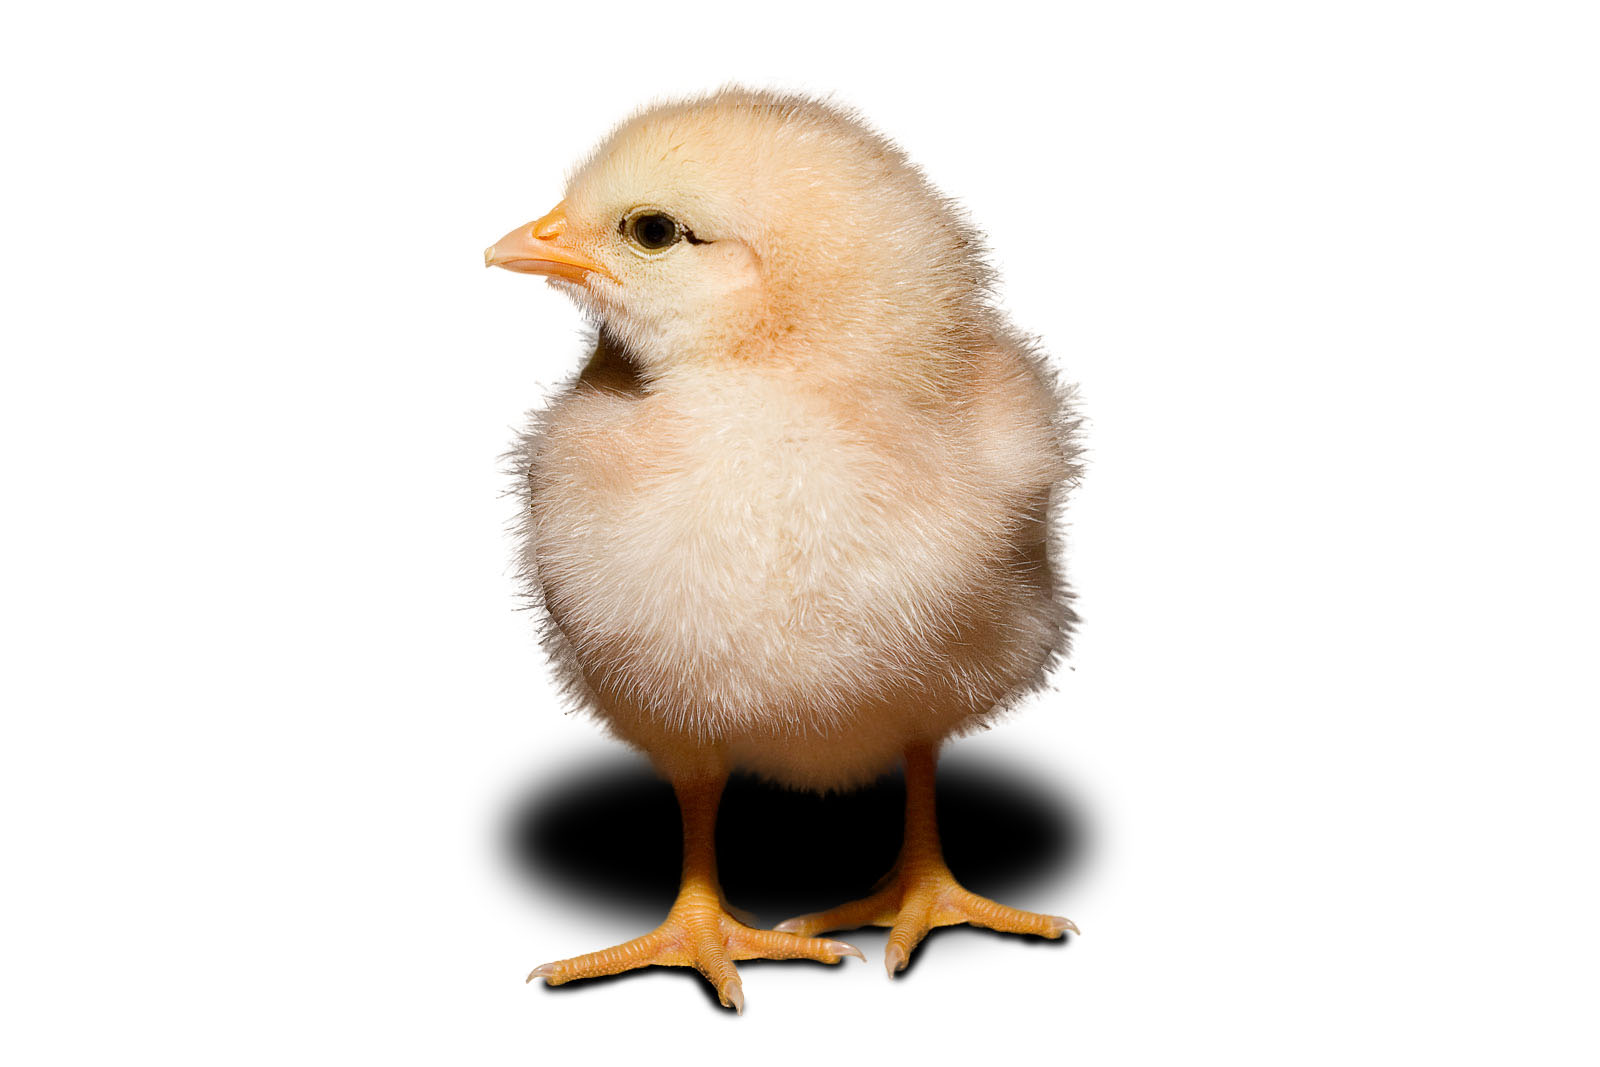 image: Day_old_chick_white_background